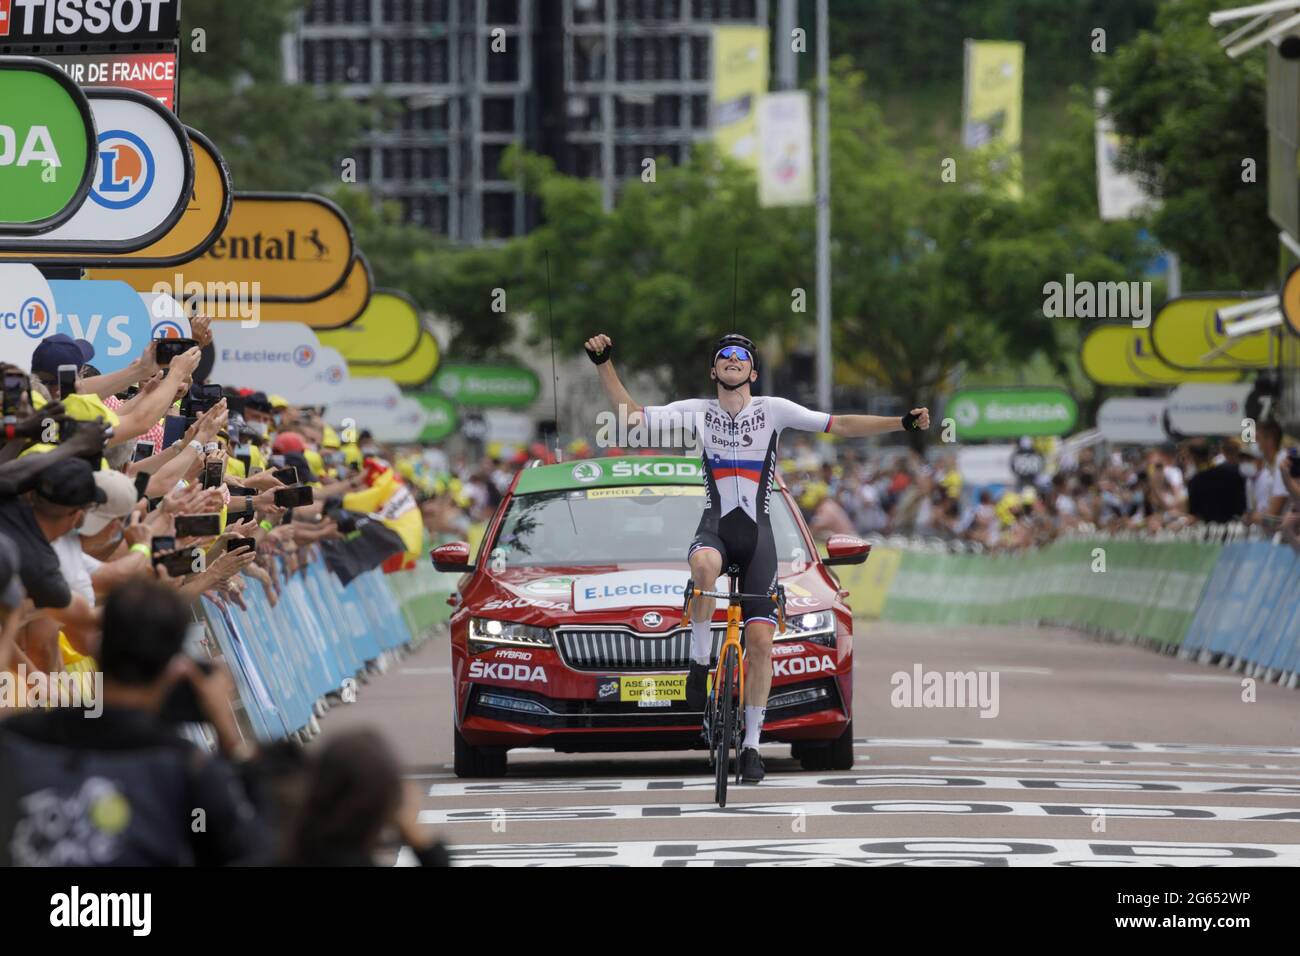 Le Creusot, France. 02 July 2021. Matej Mohoric crossing the finish line of the 7th stage of the Tour de France in Le Creusot, France. Julian Elliott News Photography Credit: Julian Elliott/Alamy Live News Stock Photo